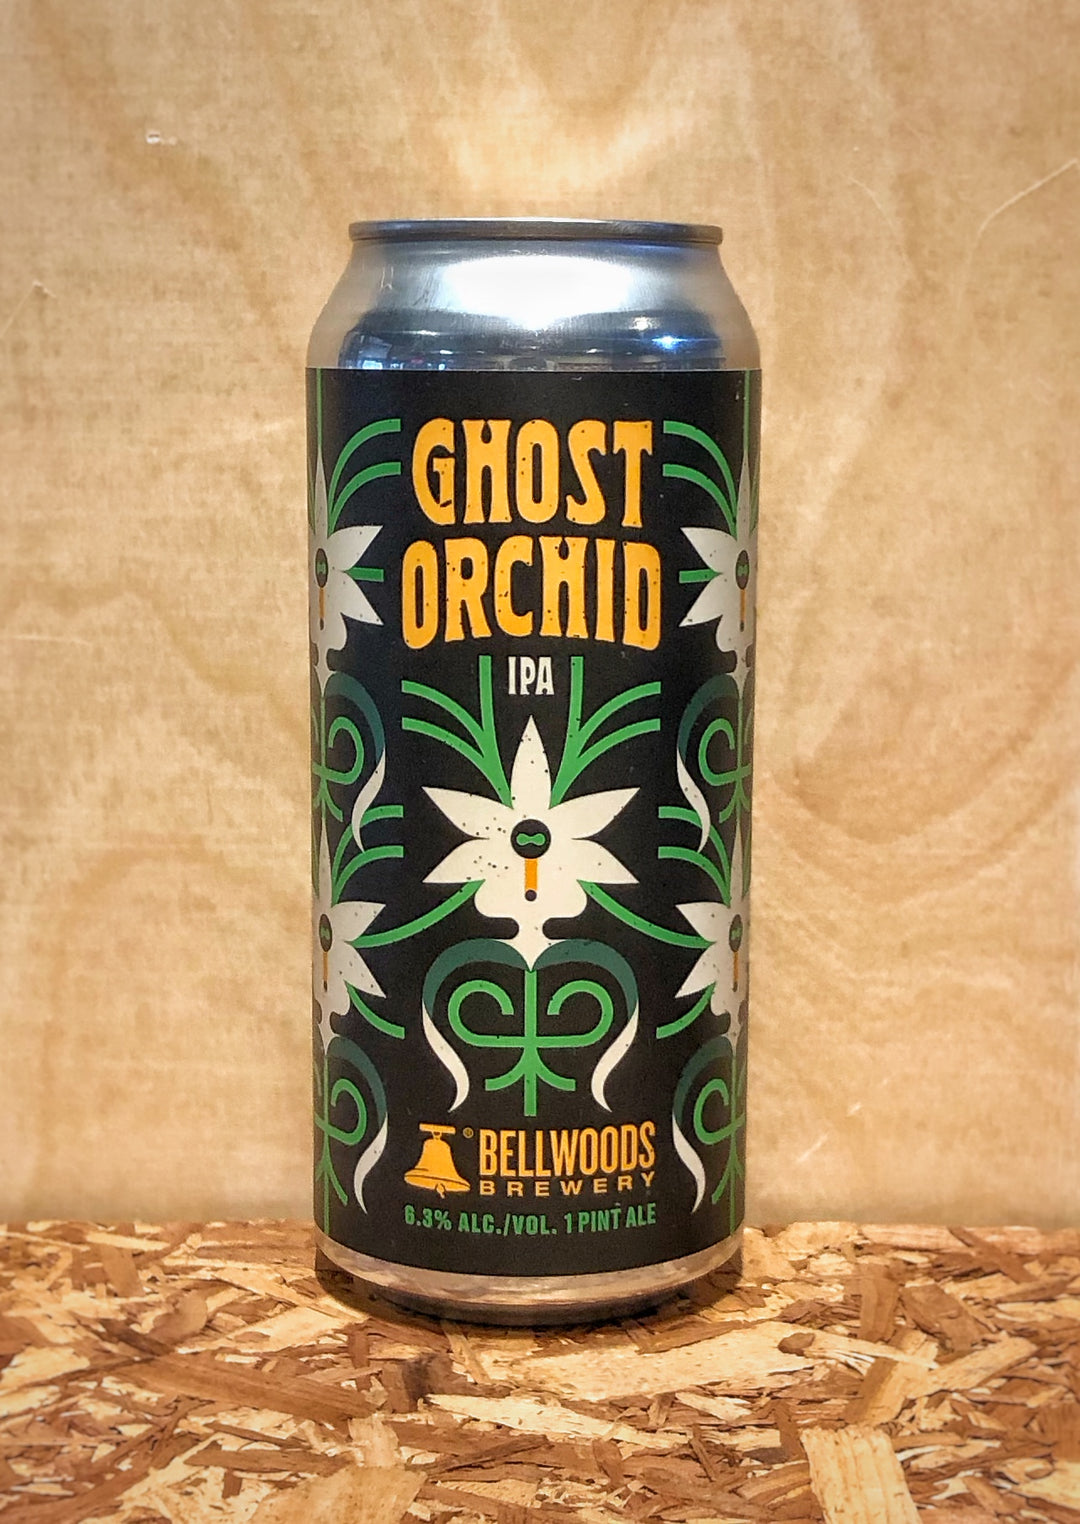 Bellwoods Brewery 'Ghost Orchid' IPA (Toronto, Ontario)